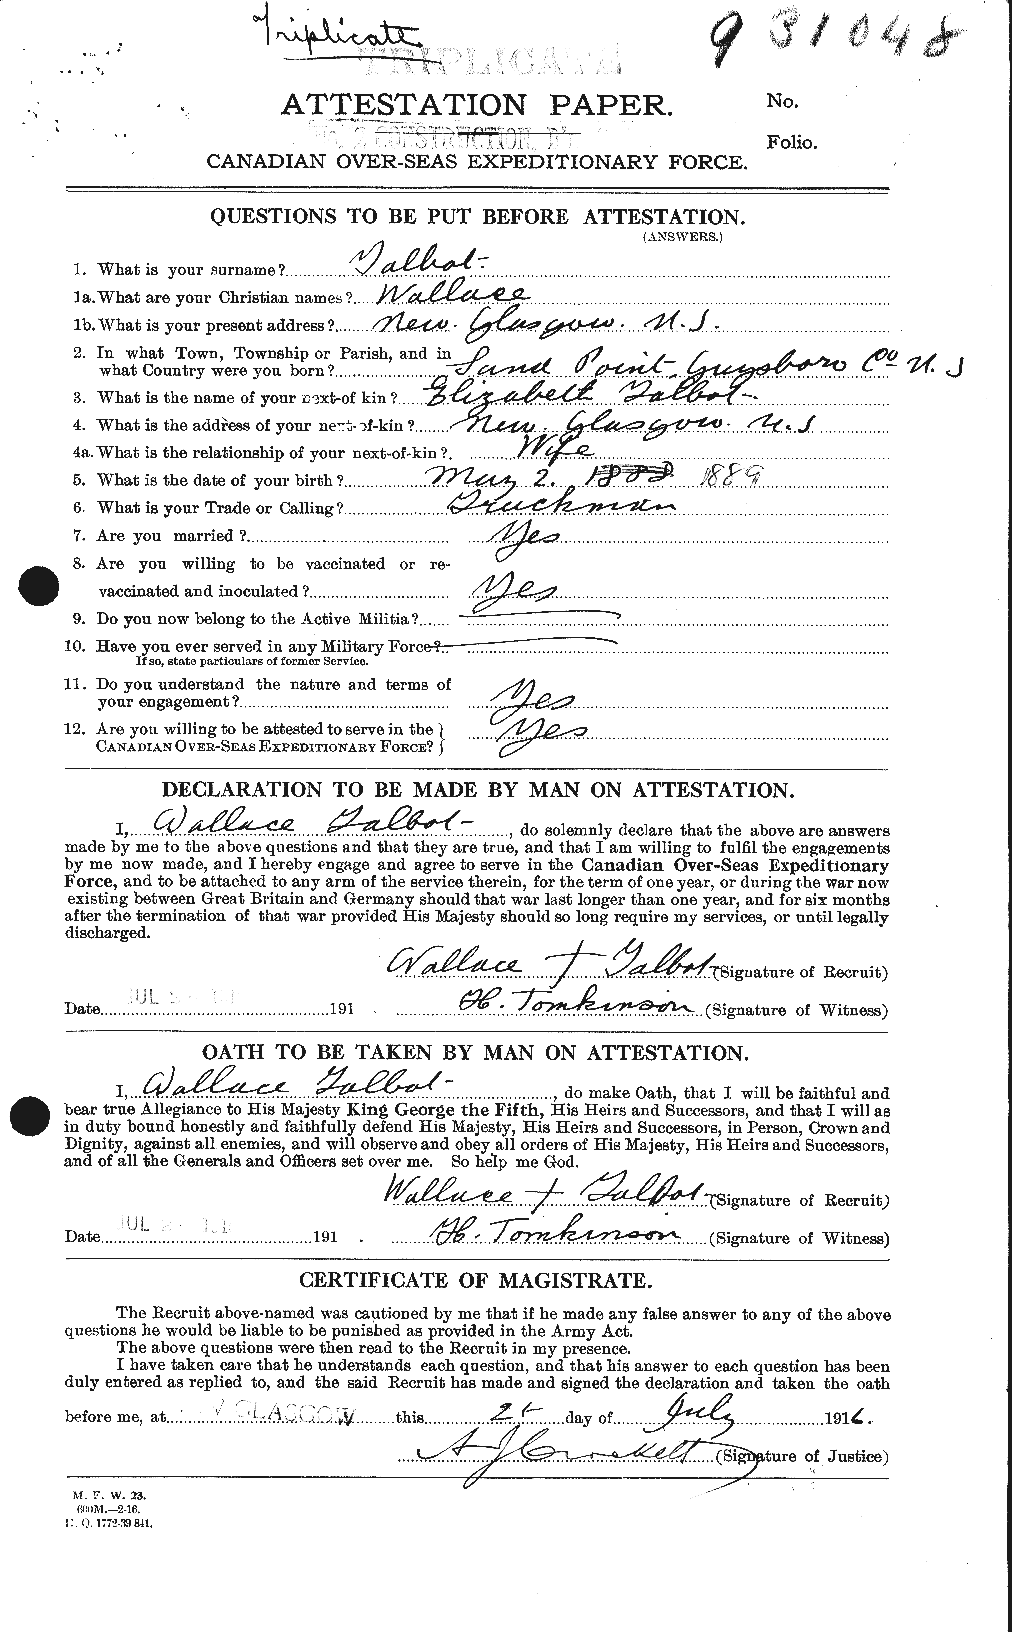 Personnel Records of the First World War - CEF 624908a